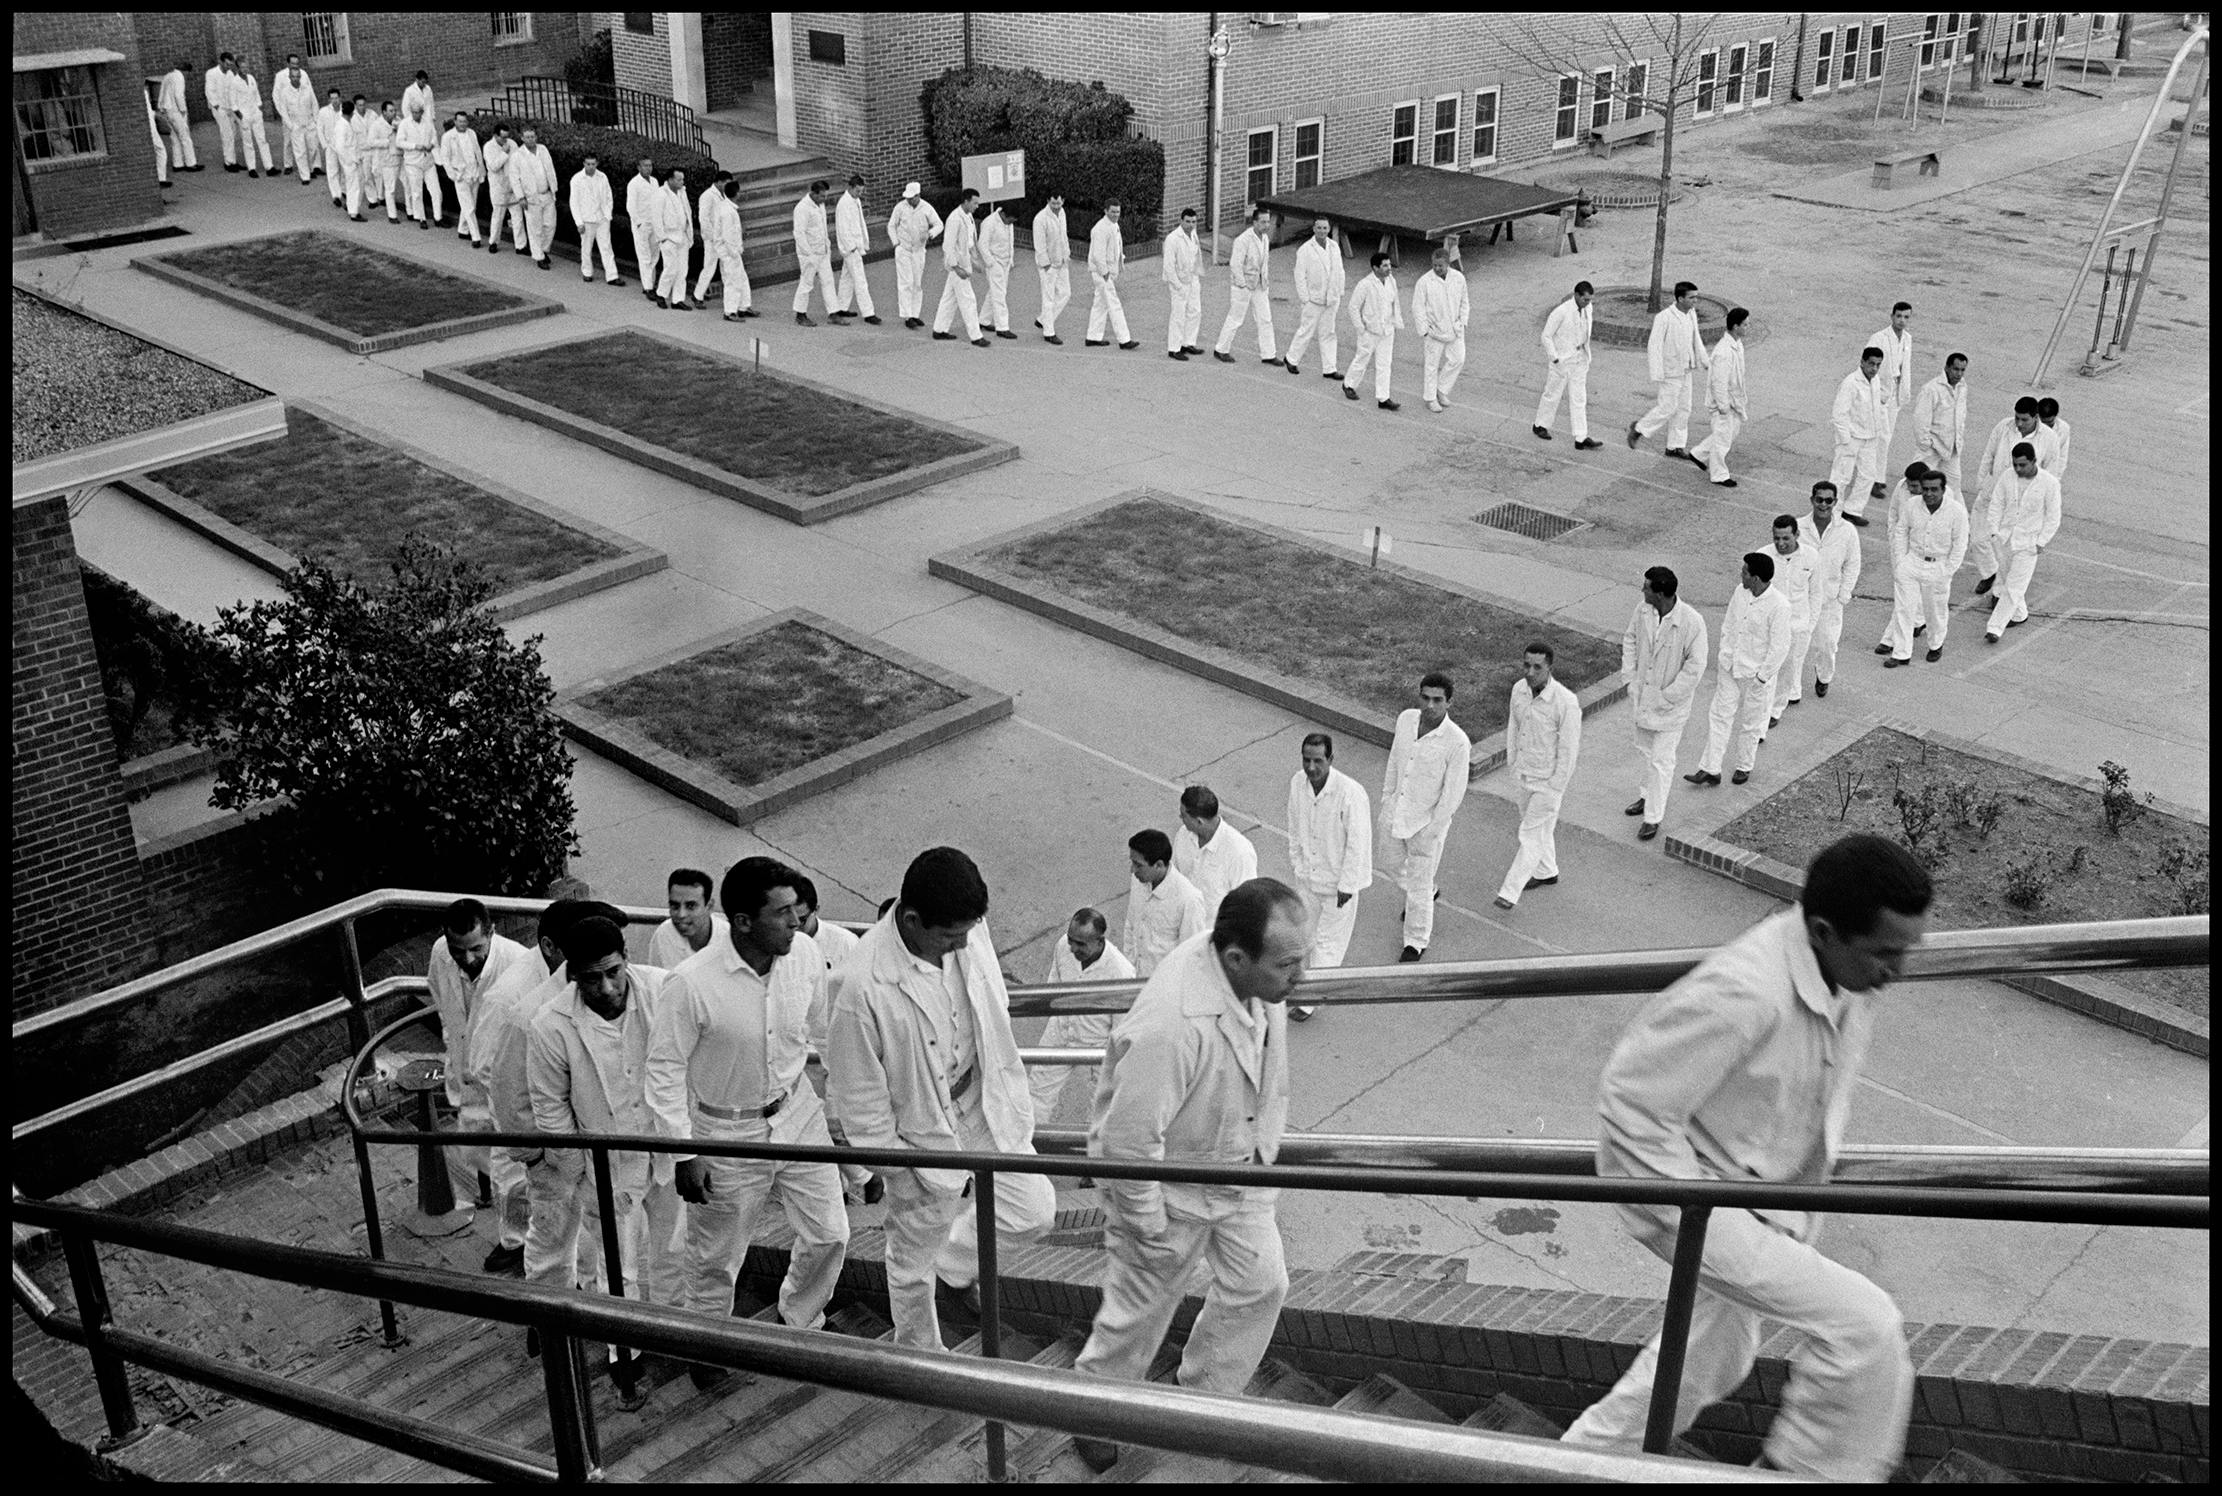 The meal line at The Walls, a walled penitentiary located near the center of the town of Huntsville, in 1968.